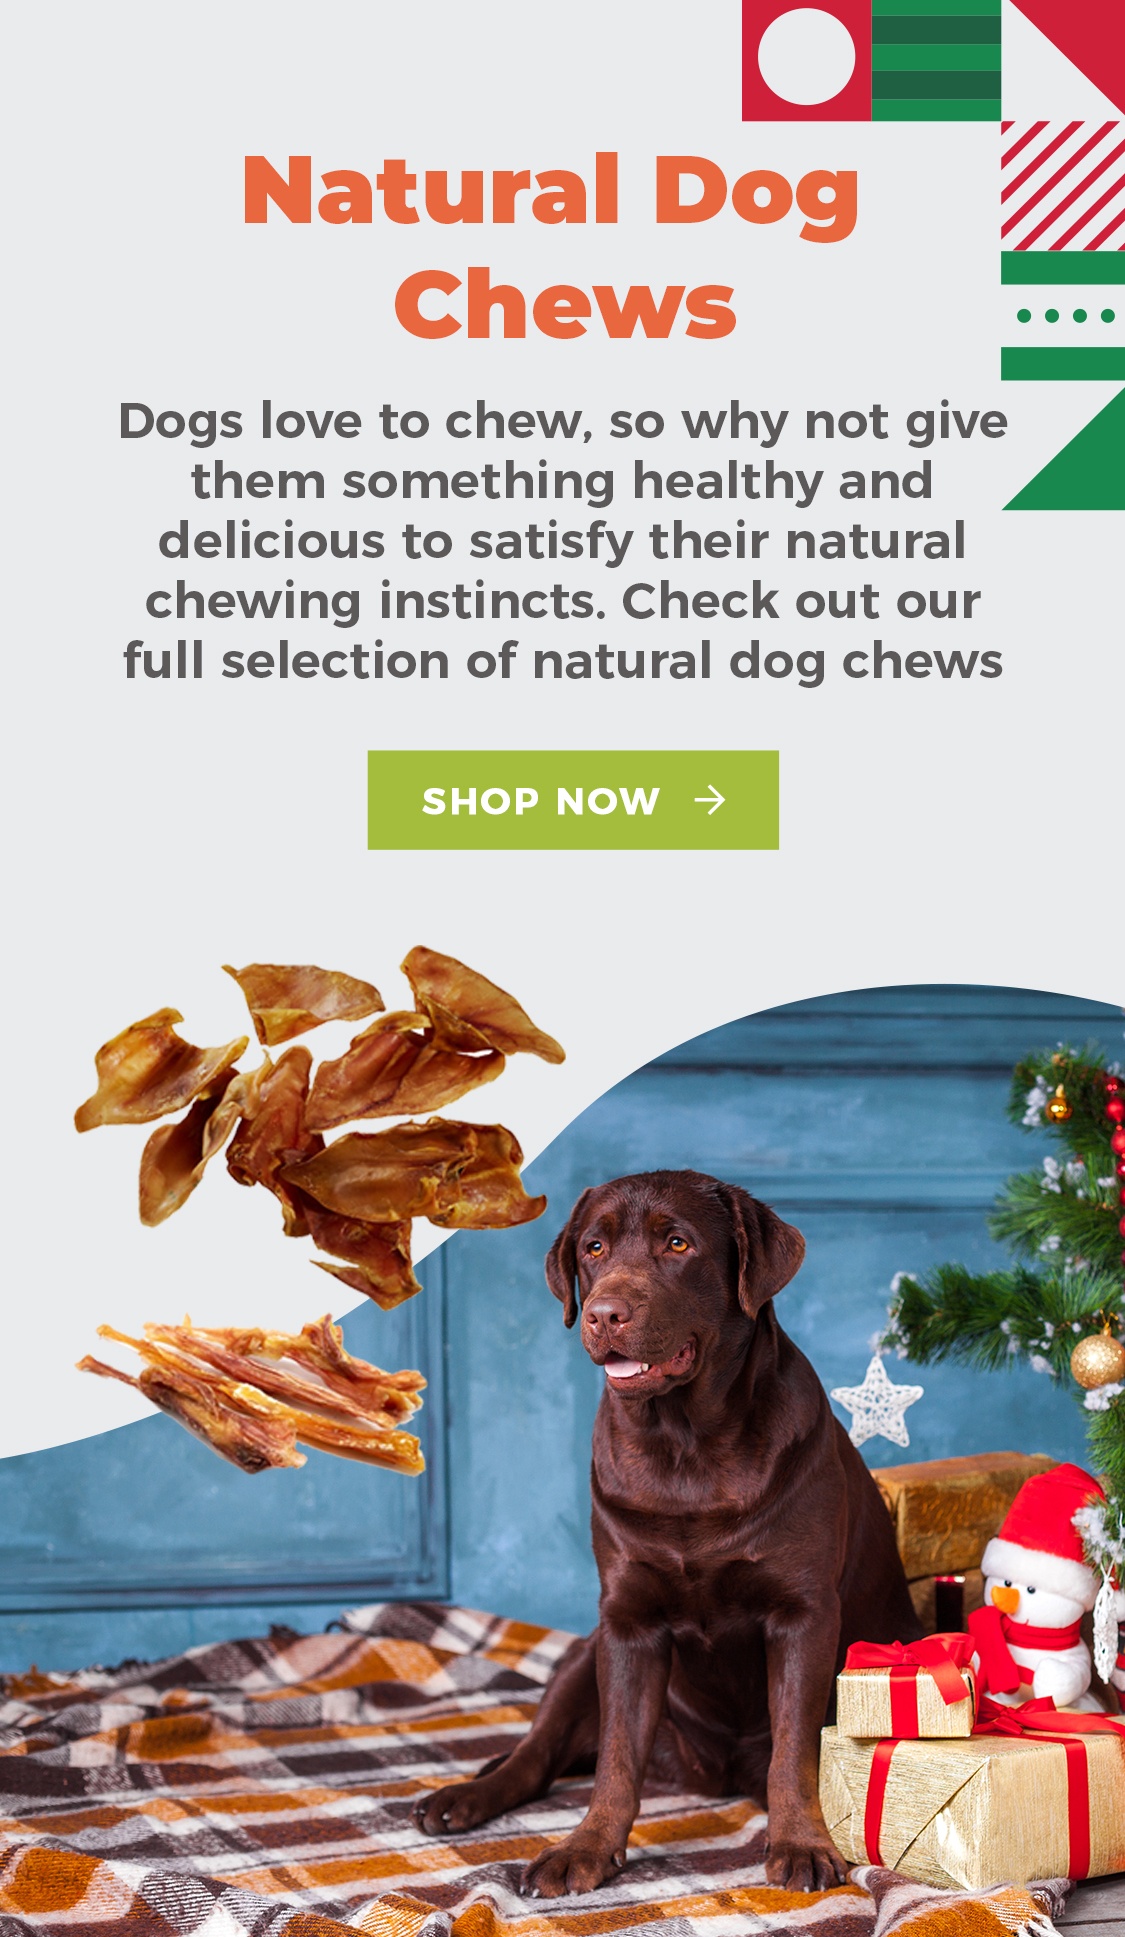 Dog Christmas presents: A list of 12 gift ideas for your dog! - Tromplo